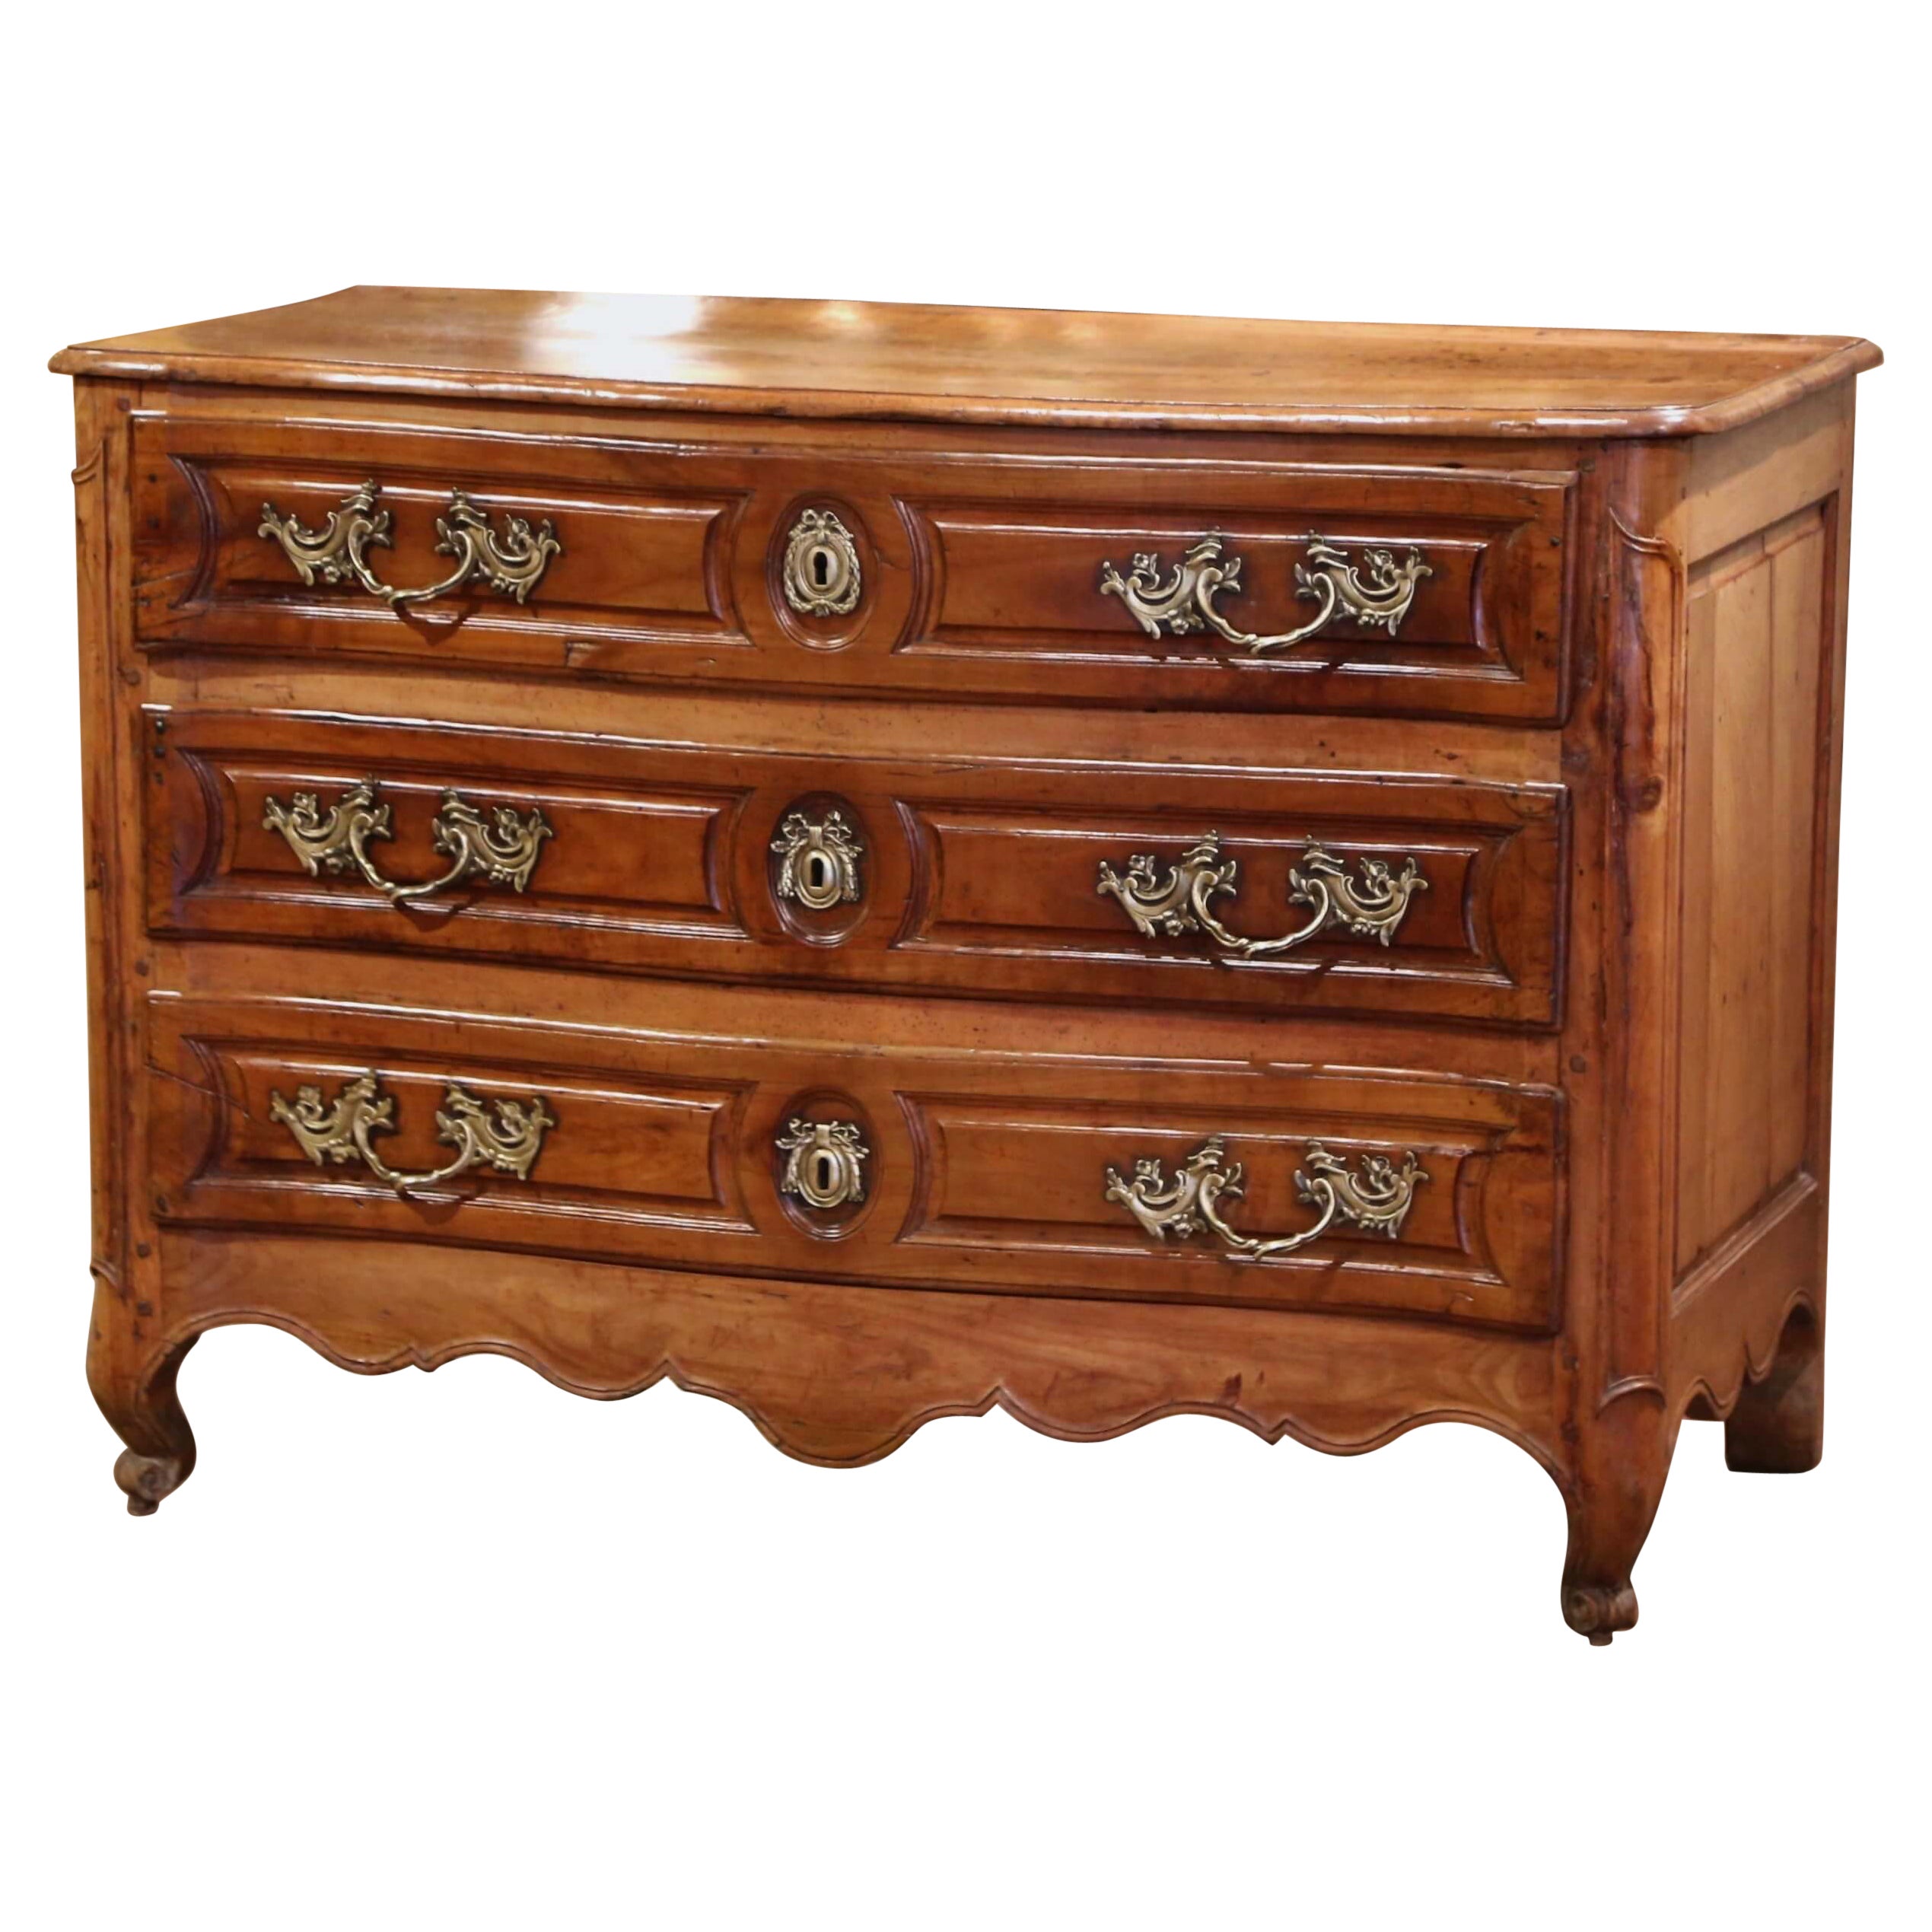 Mid-18th Century French Louis XV Carved Walnut Three Drawer Commode Chest For Sale